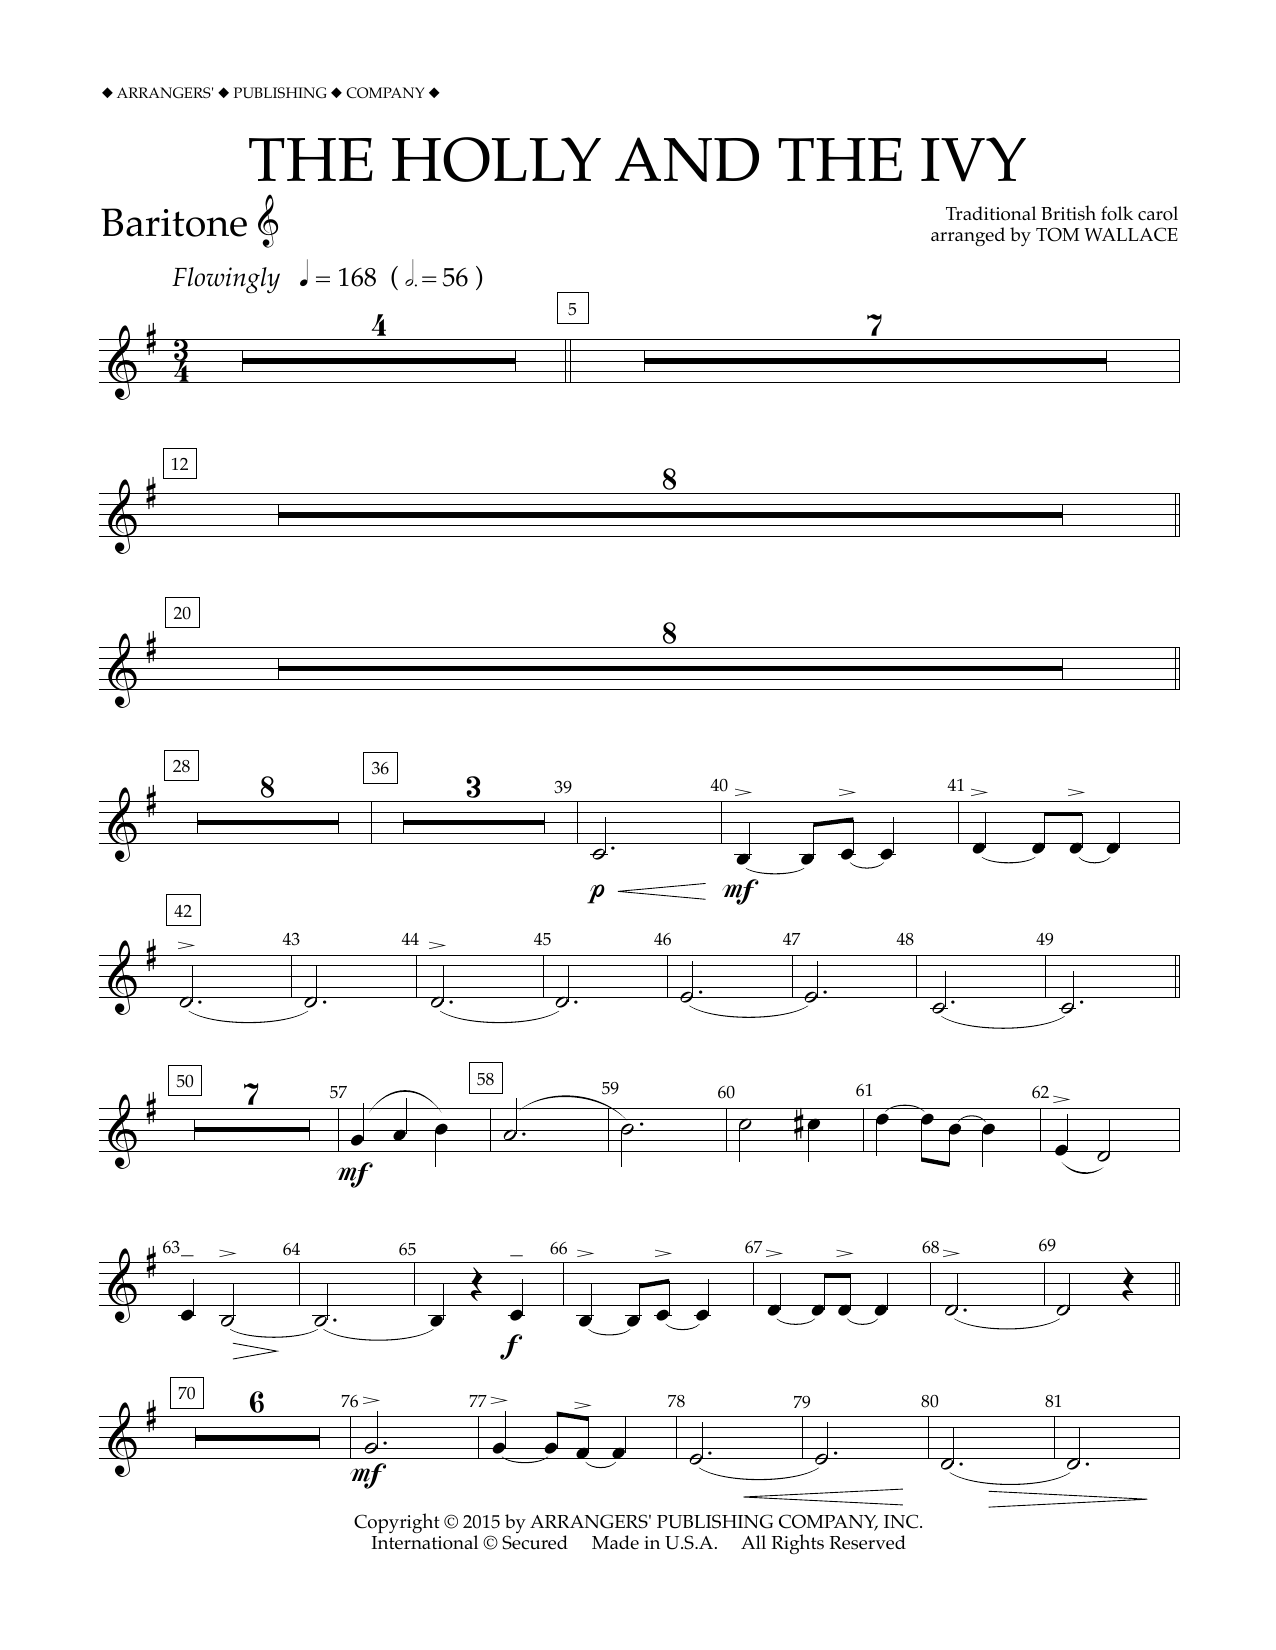 Download Tom Wallace The Holly and the Ivy - Baritone T.C. Sheet Music